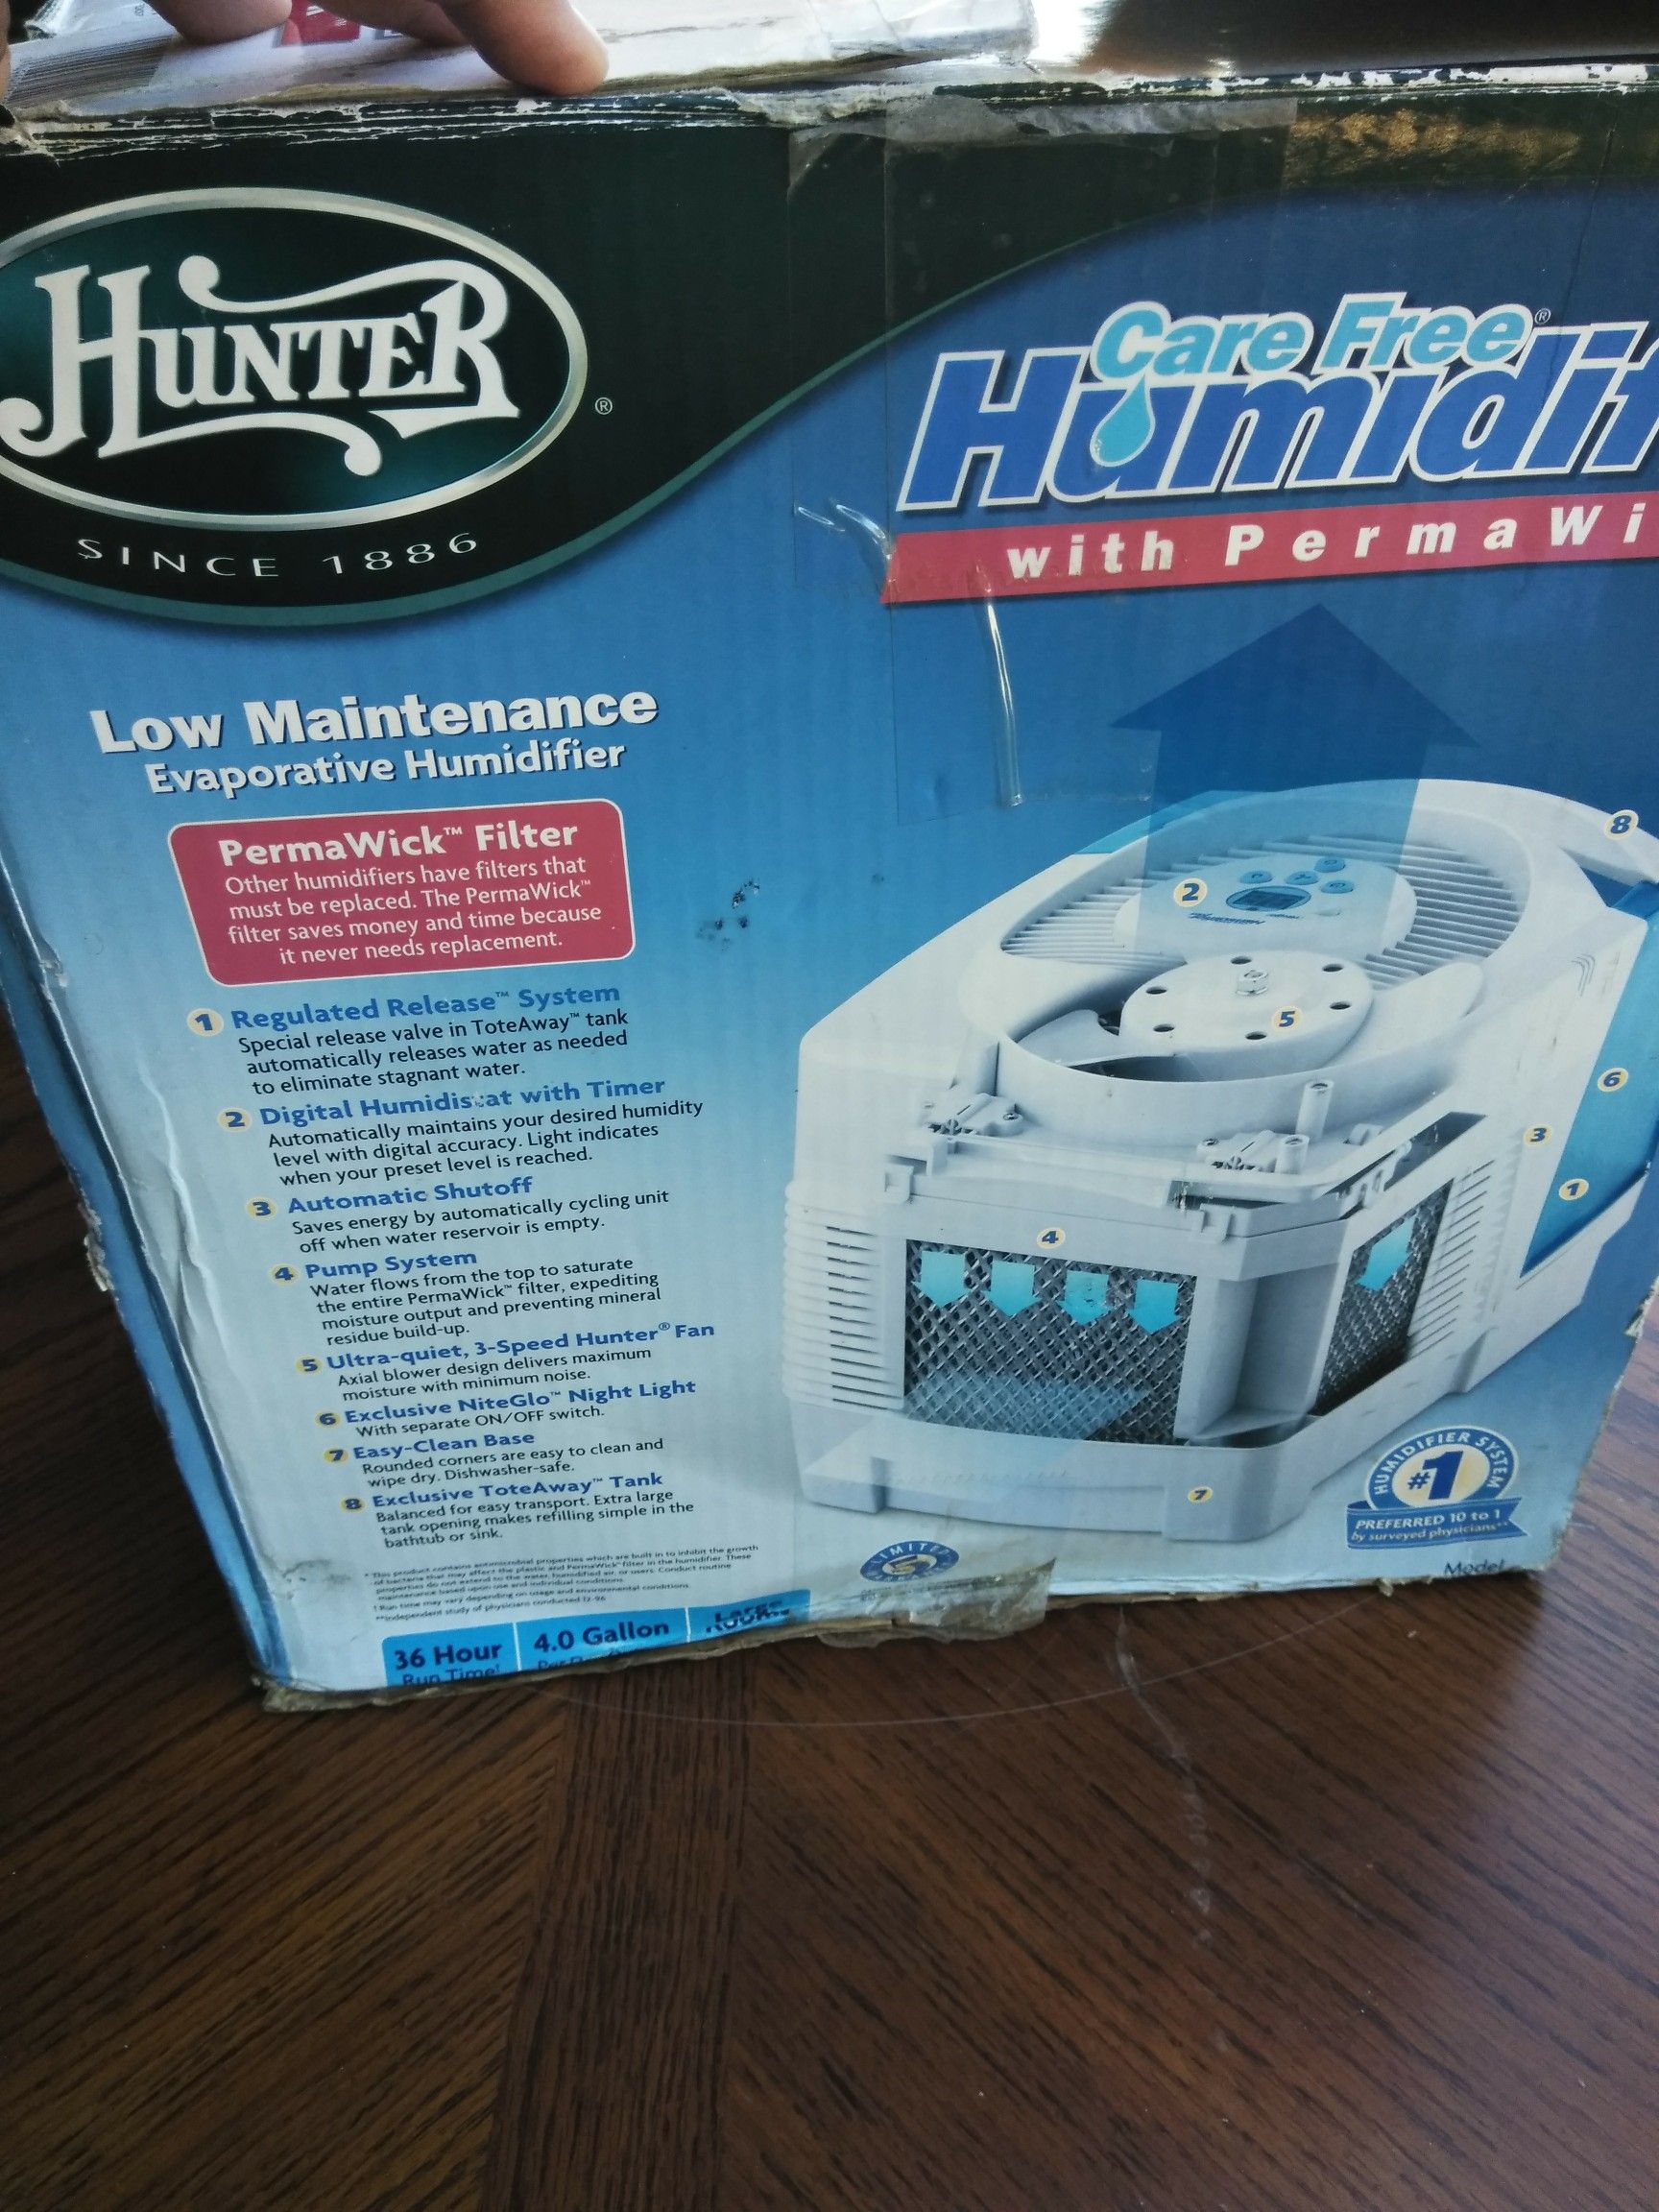 Humidifier with Perma Wick